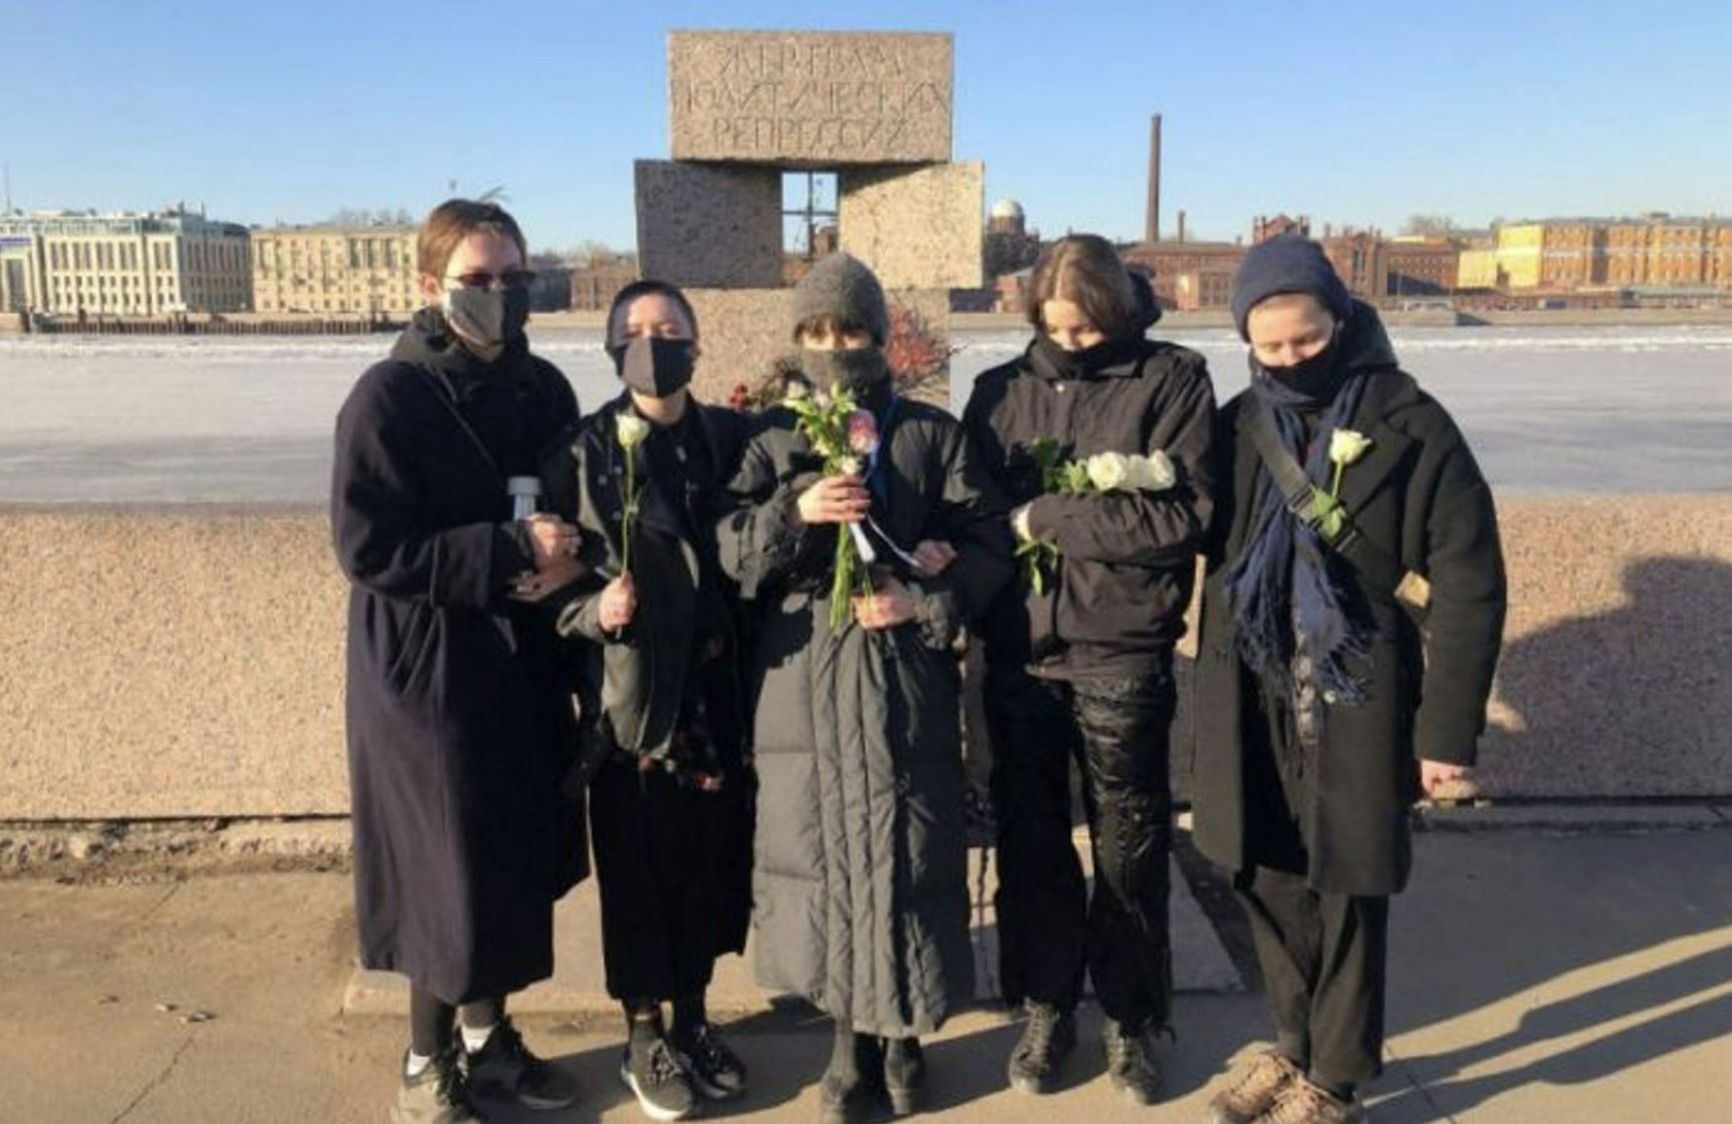  A “Girls in Black” protest in St. Petersburg 